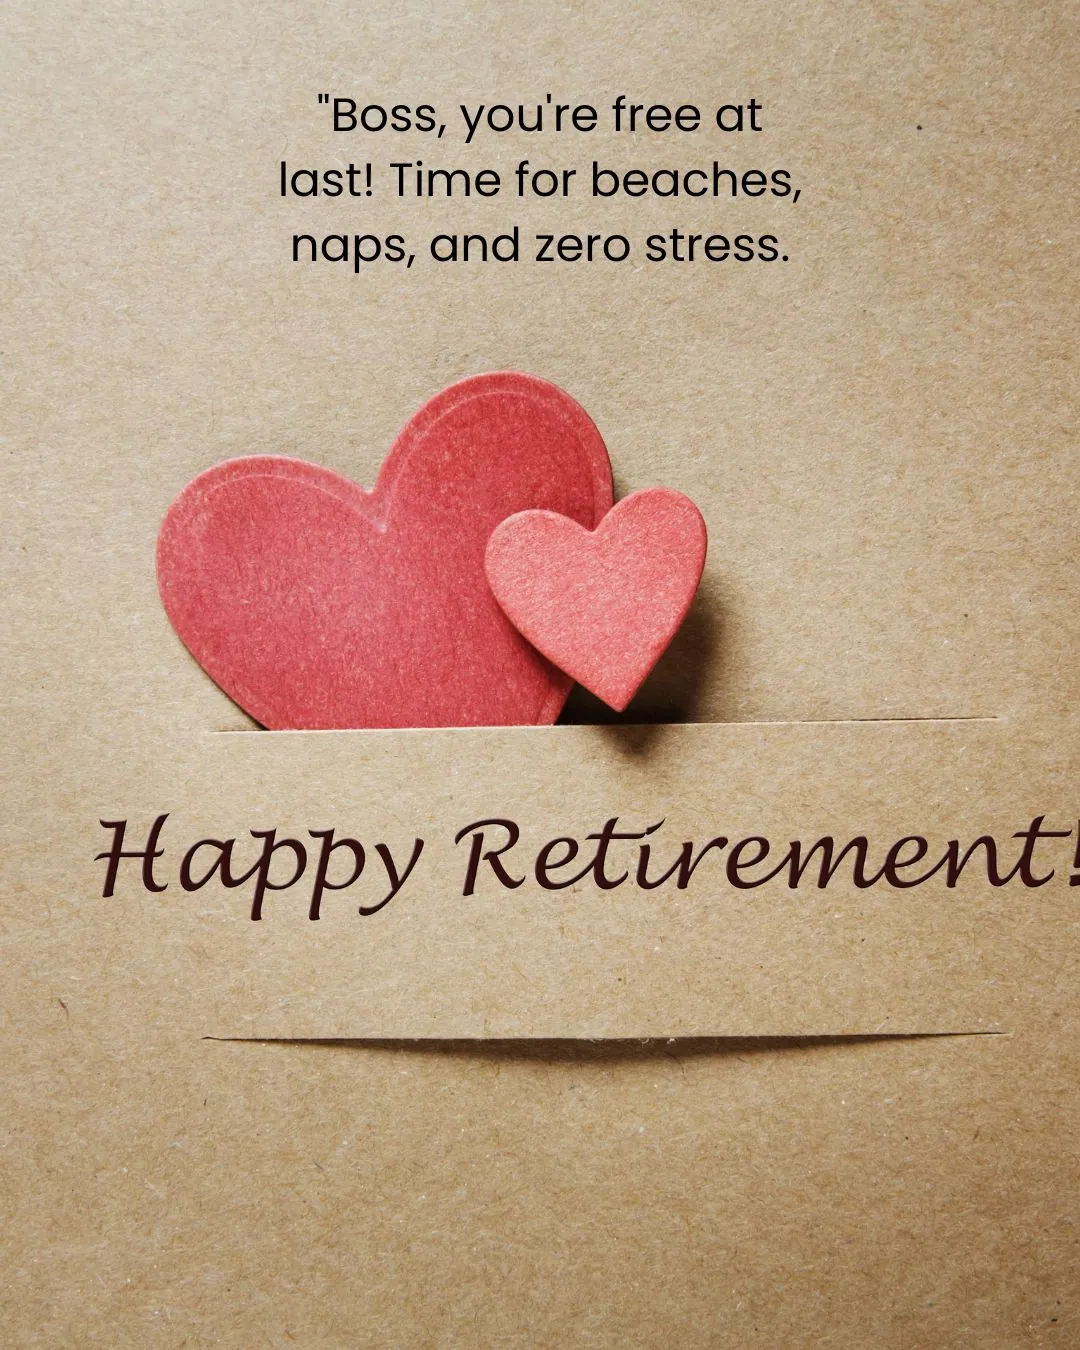 Funny Retirement Quotes for Boss 1